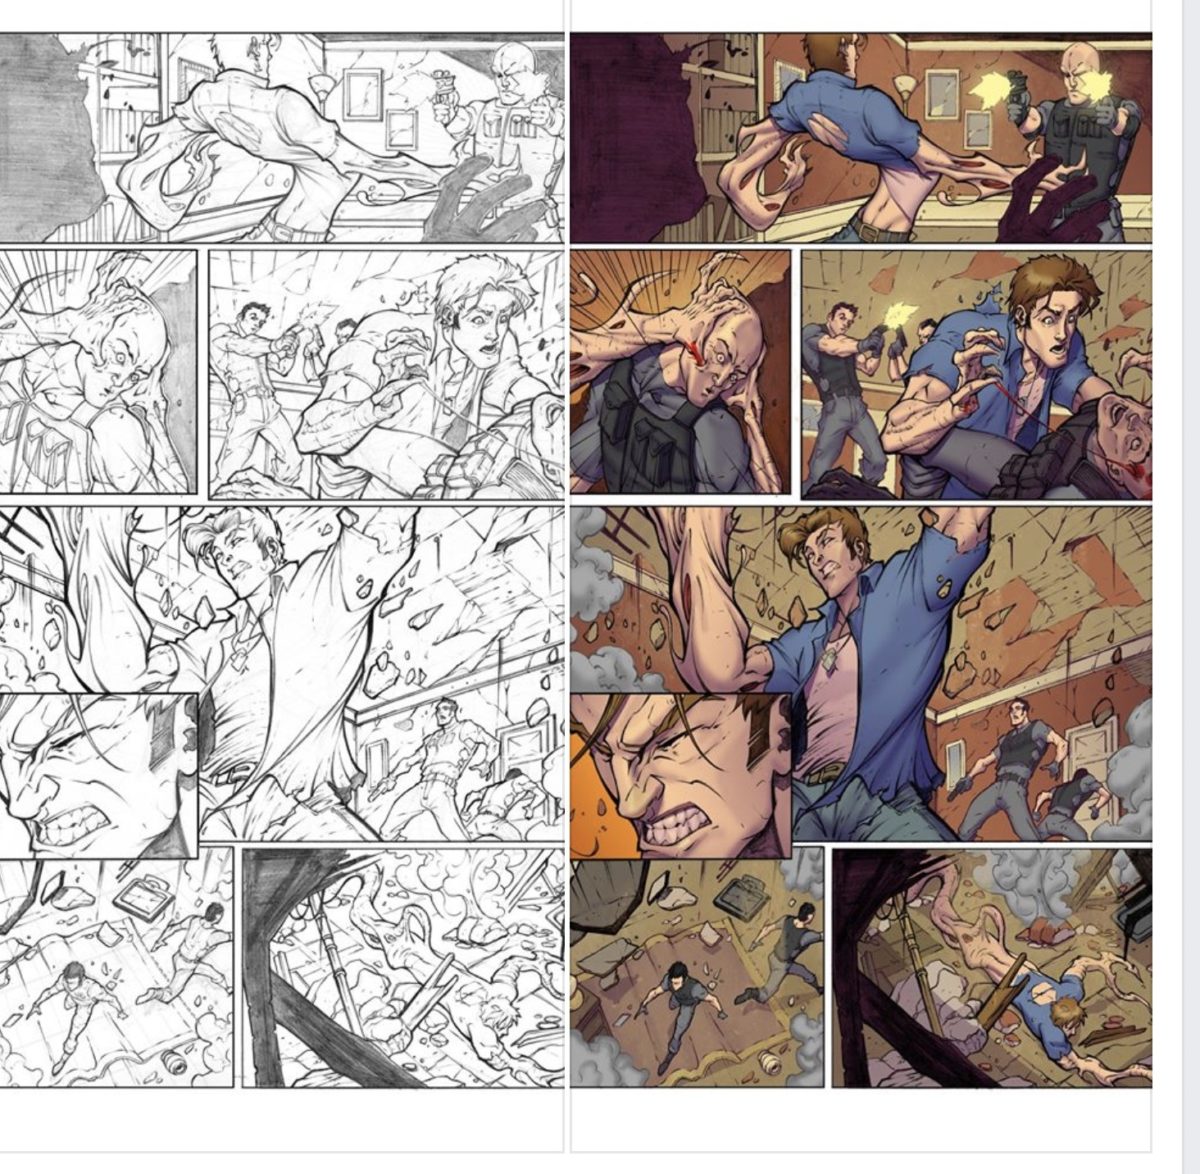 Chase #1 by Guido Martinez and Simone Buonfantino is now on kickstarter. And there 10 PREVIEW